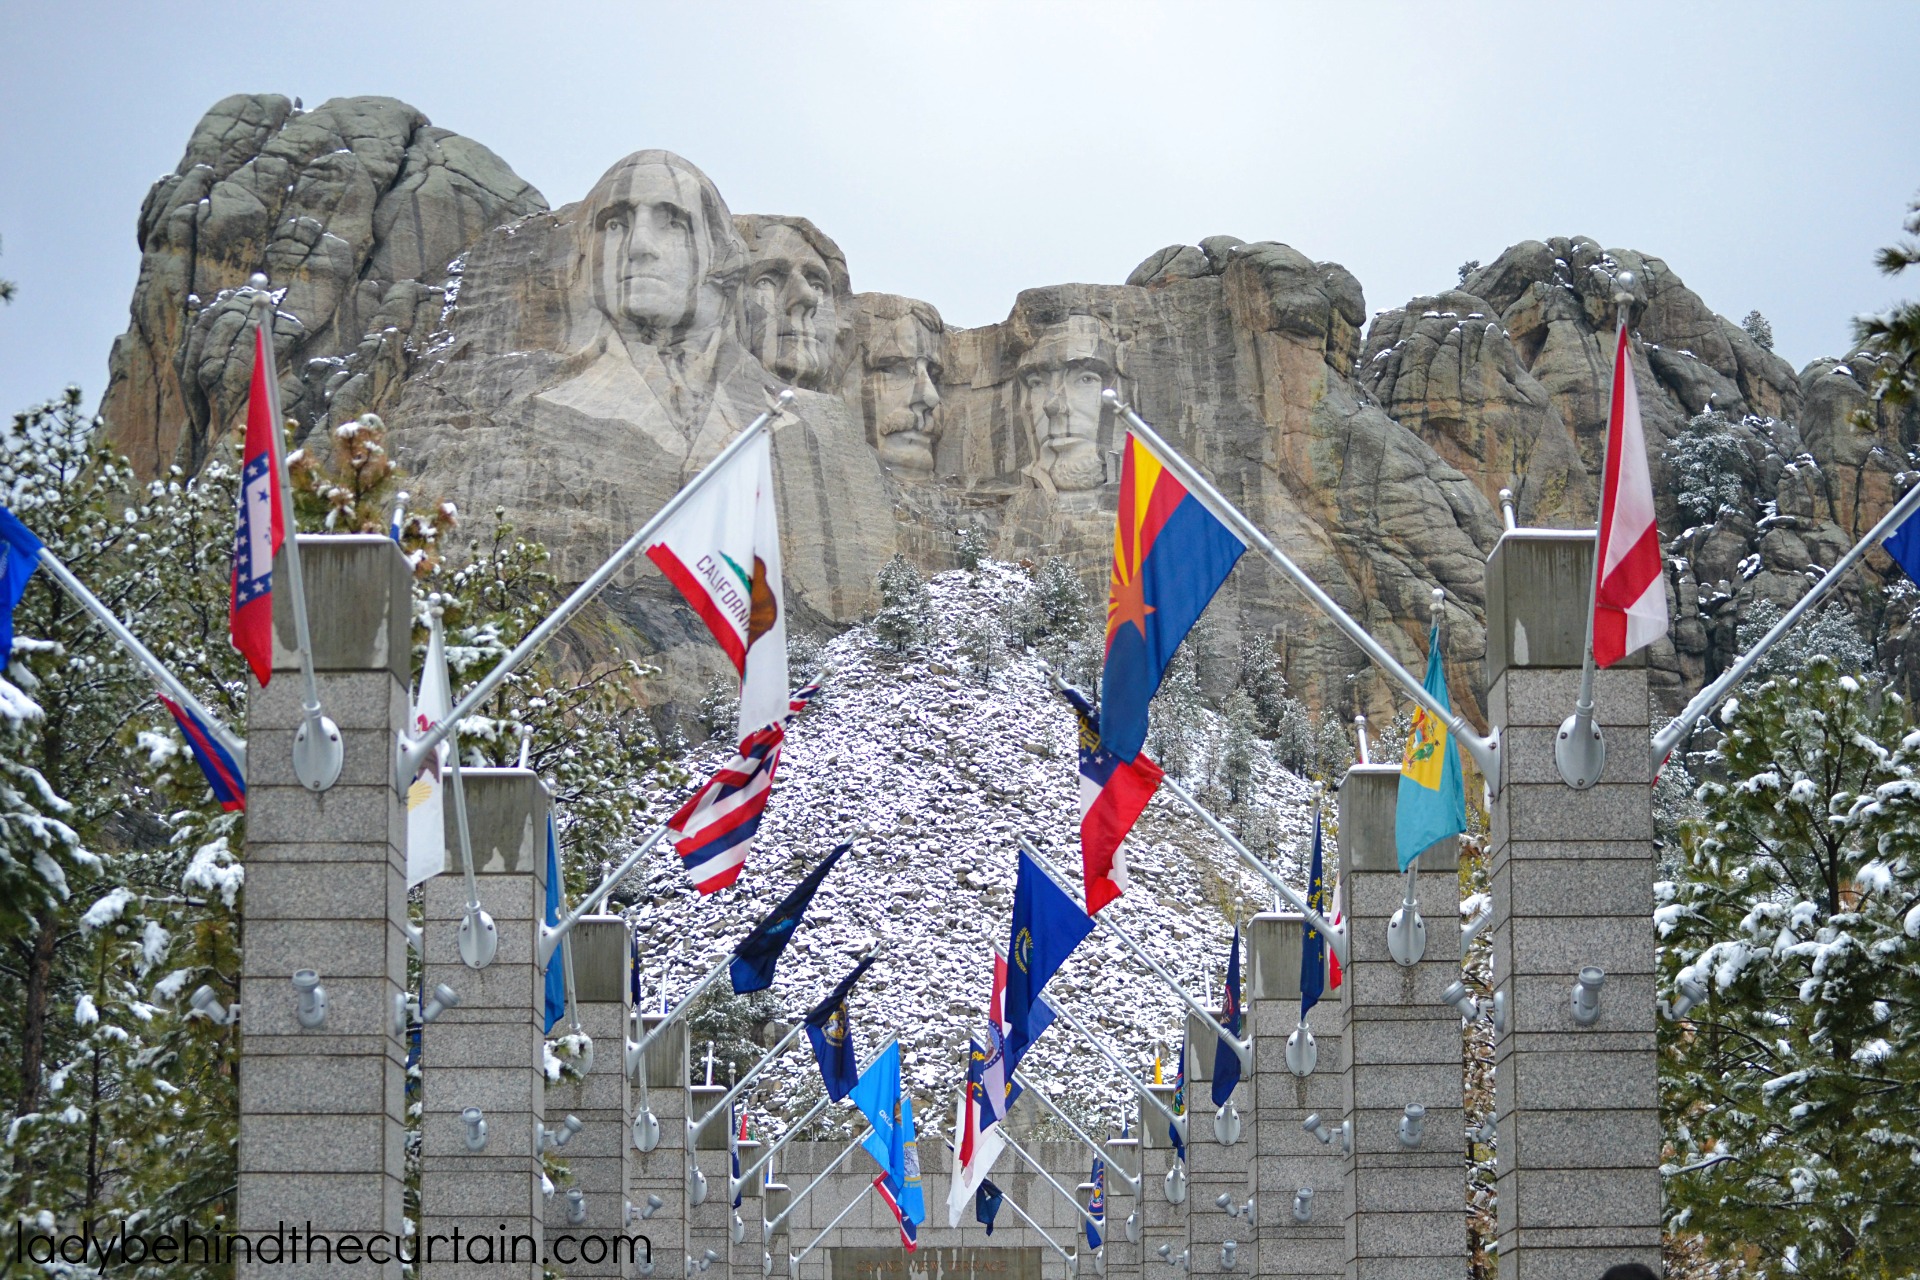 Our Vacation at Mount Rushmore National Memorial | This was by far the BEST vacation we've EVER had!